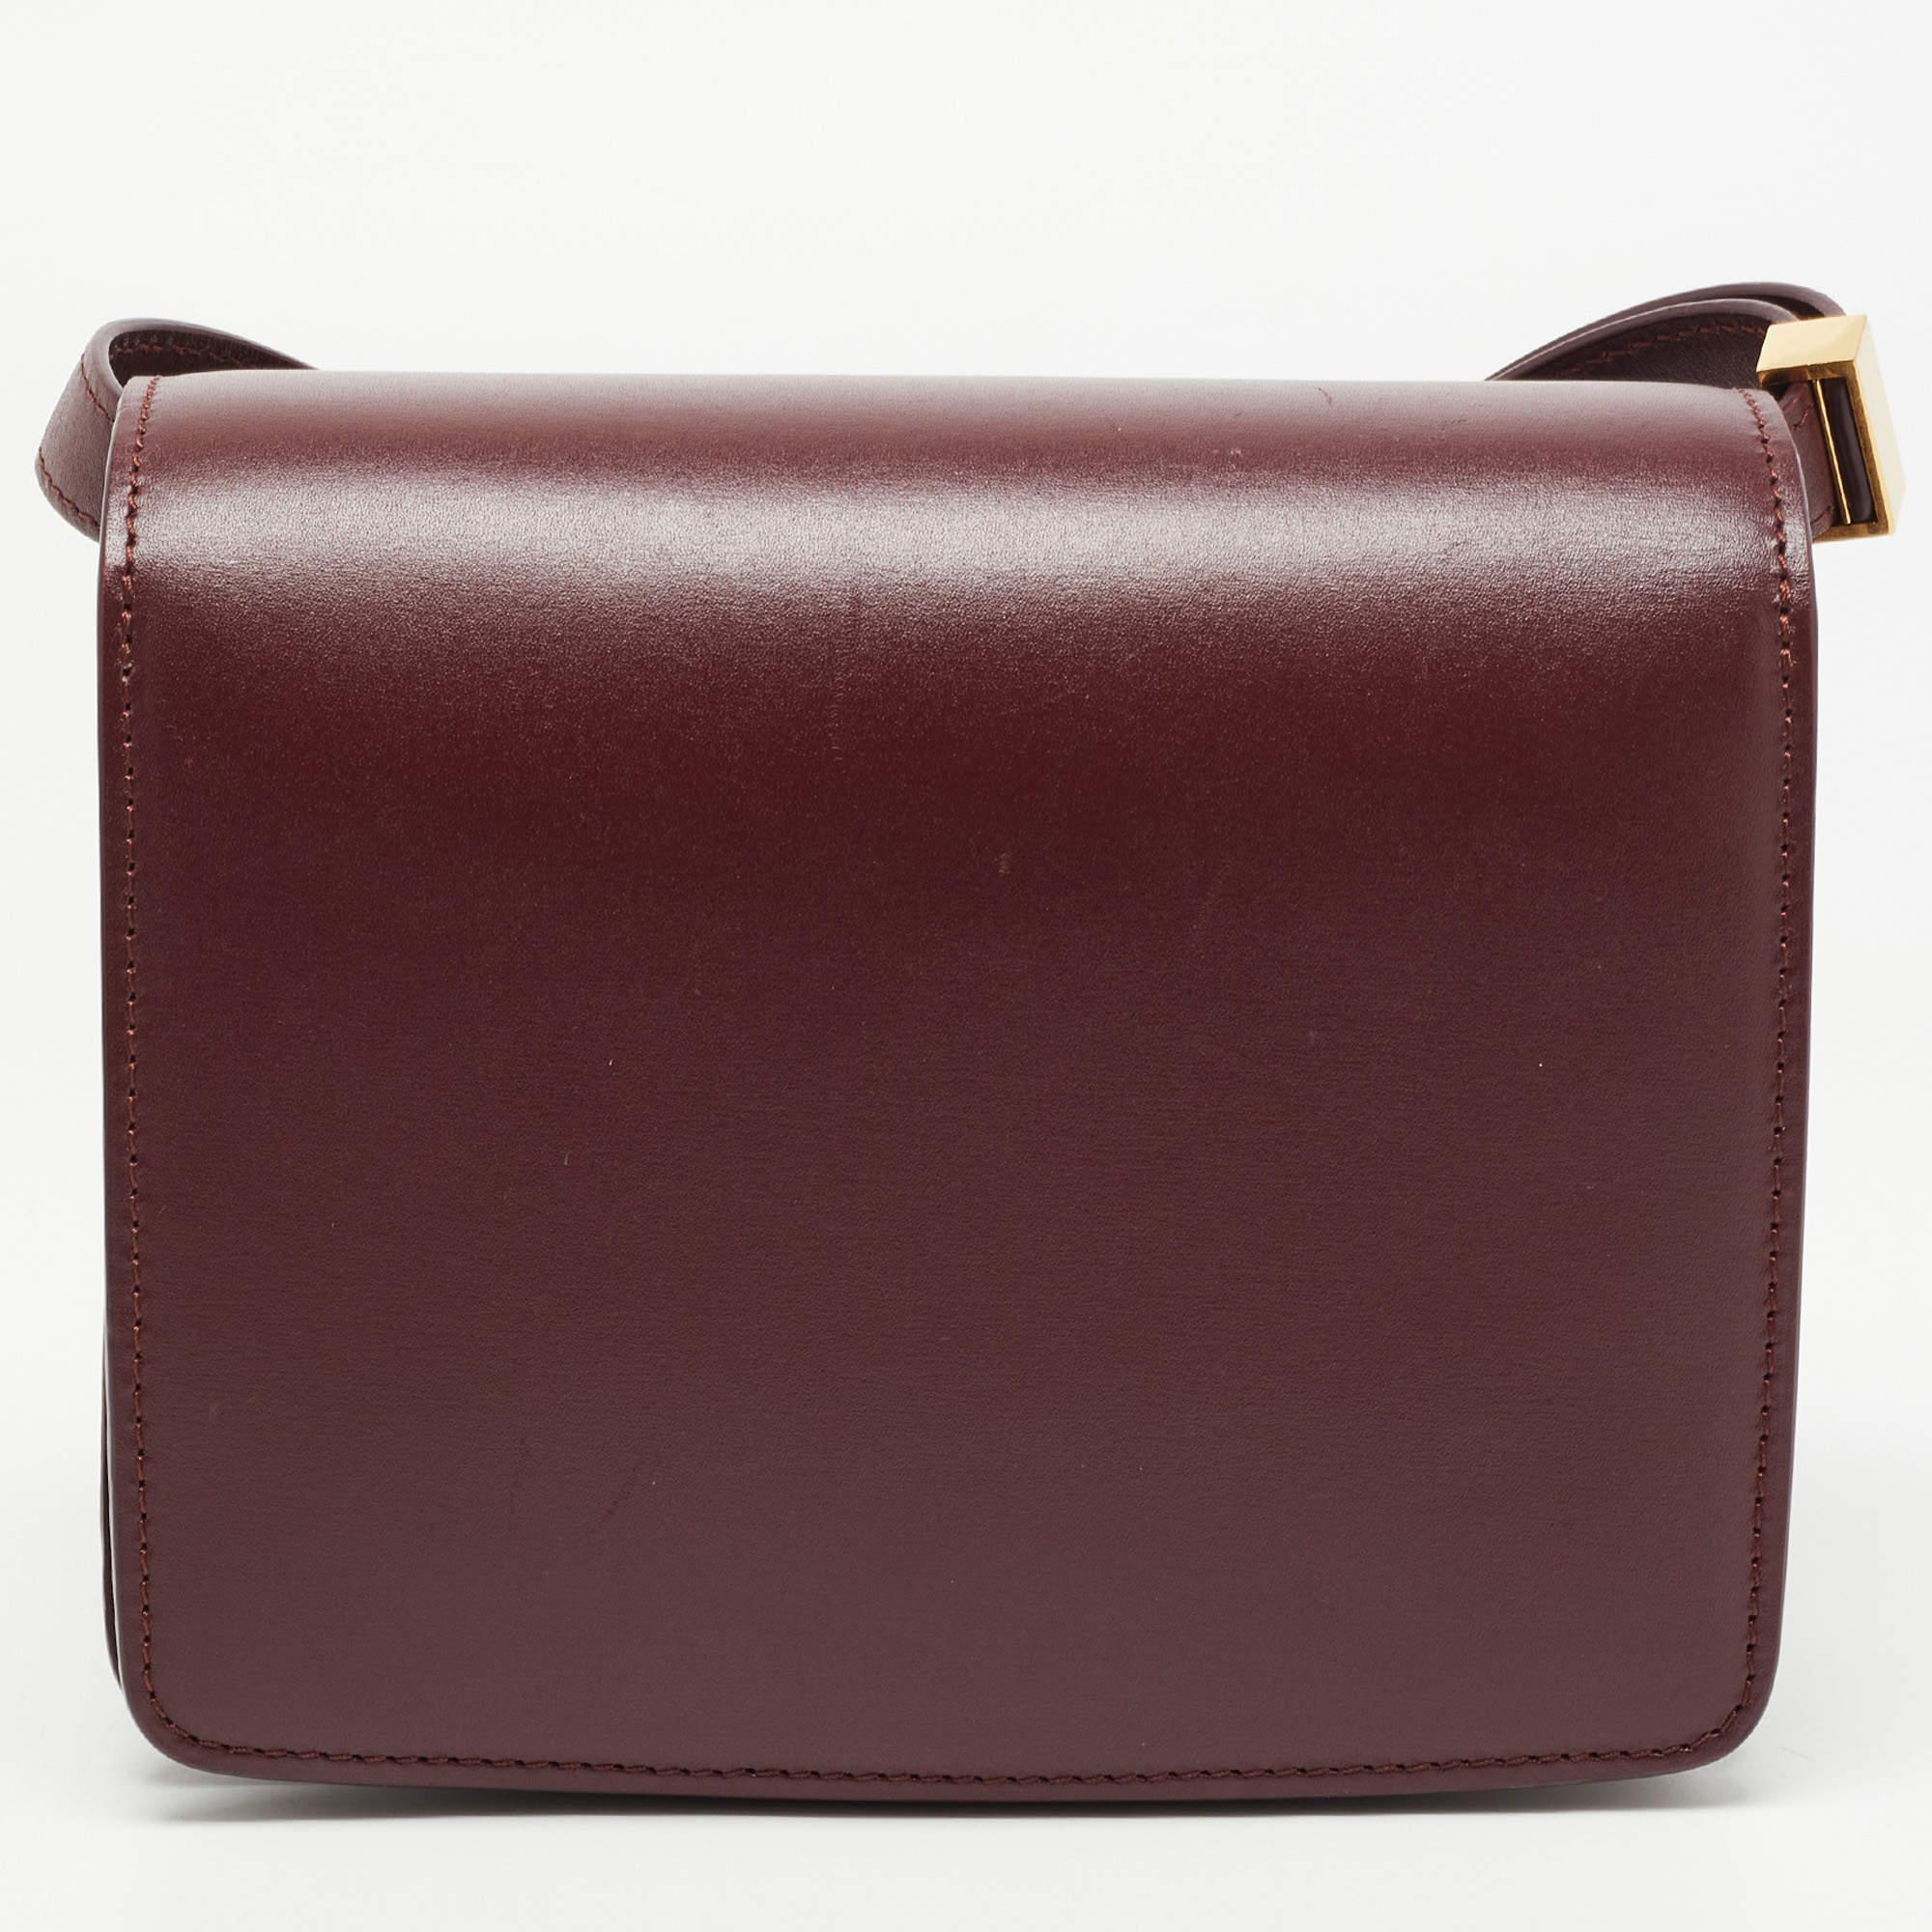 Thoughtful details, high quality, and everyday convenience mark this Classic Box Flap Bag for women by Celine. The bag is sewn with skill to deliver a refined look and an impeccable finish.

